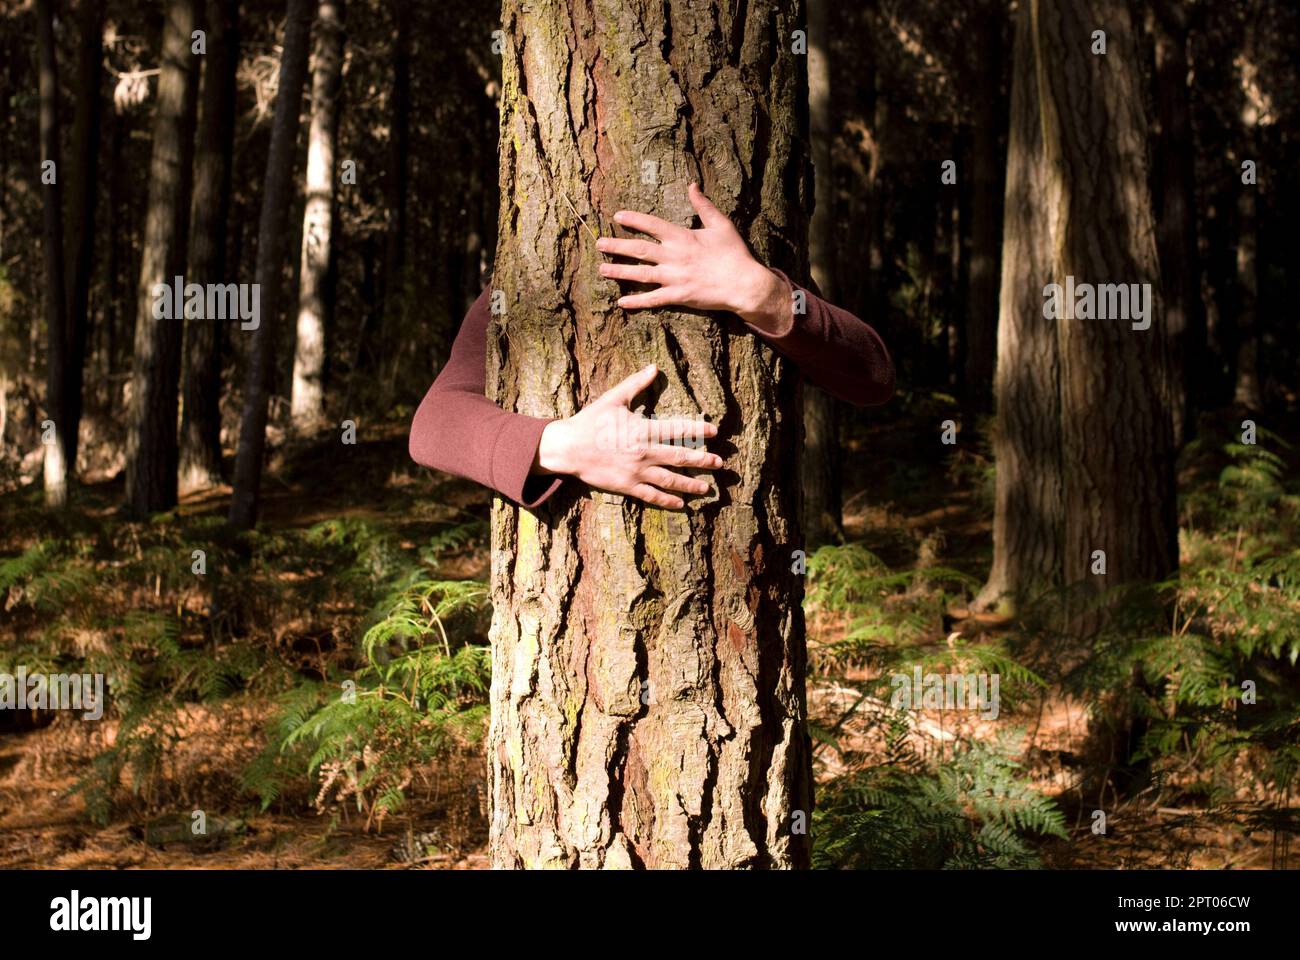 Arms hugging a tree in a forest. Stock Photo